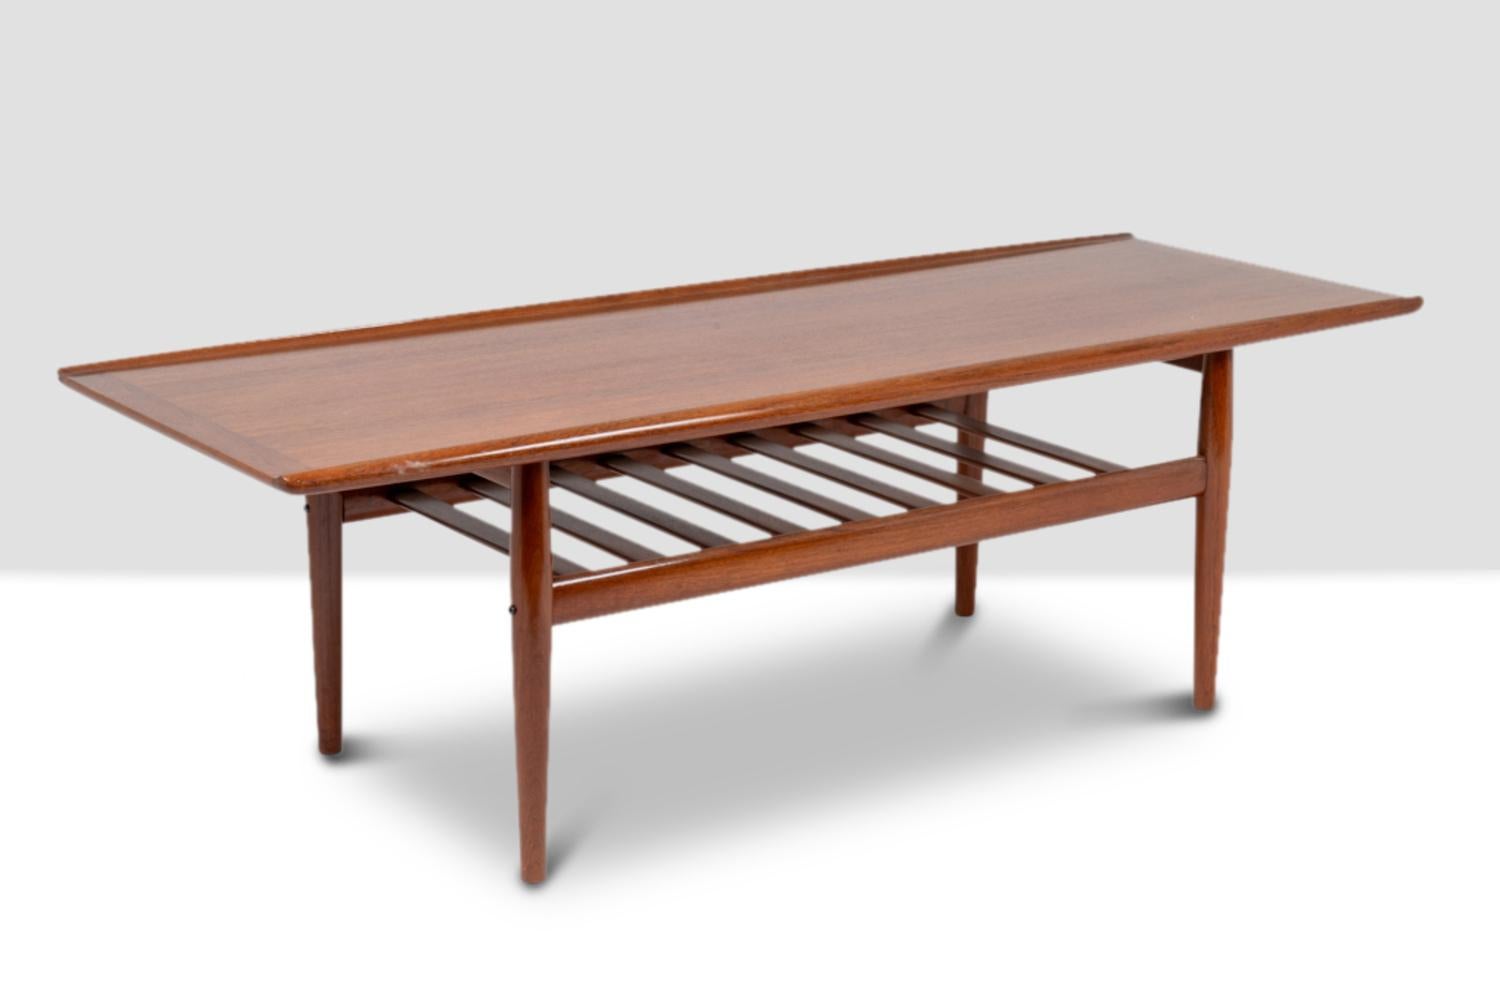 Grete Jalk for Glostrup.

Teak coffee table model “GJ106” in a rectangular shape, with a slatted part under the top allowing you to place magazines or books. Straight base.

Danish work realized in the 1960s.

Reference: LS5697536B